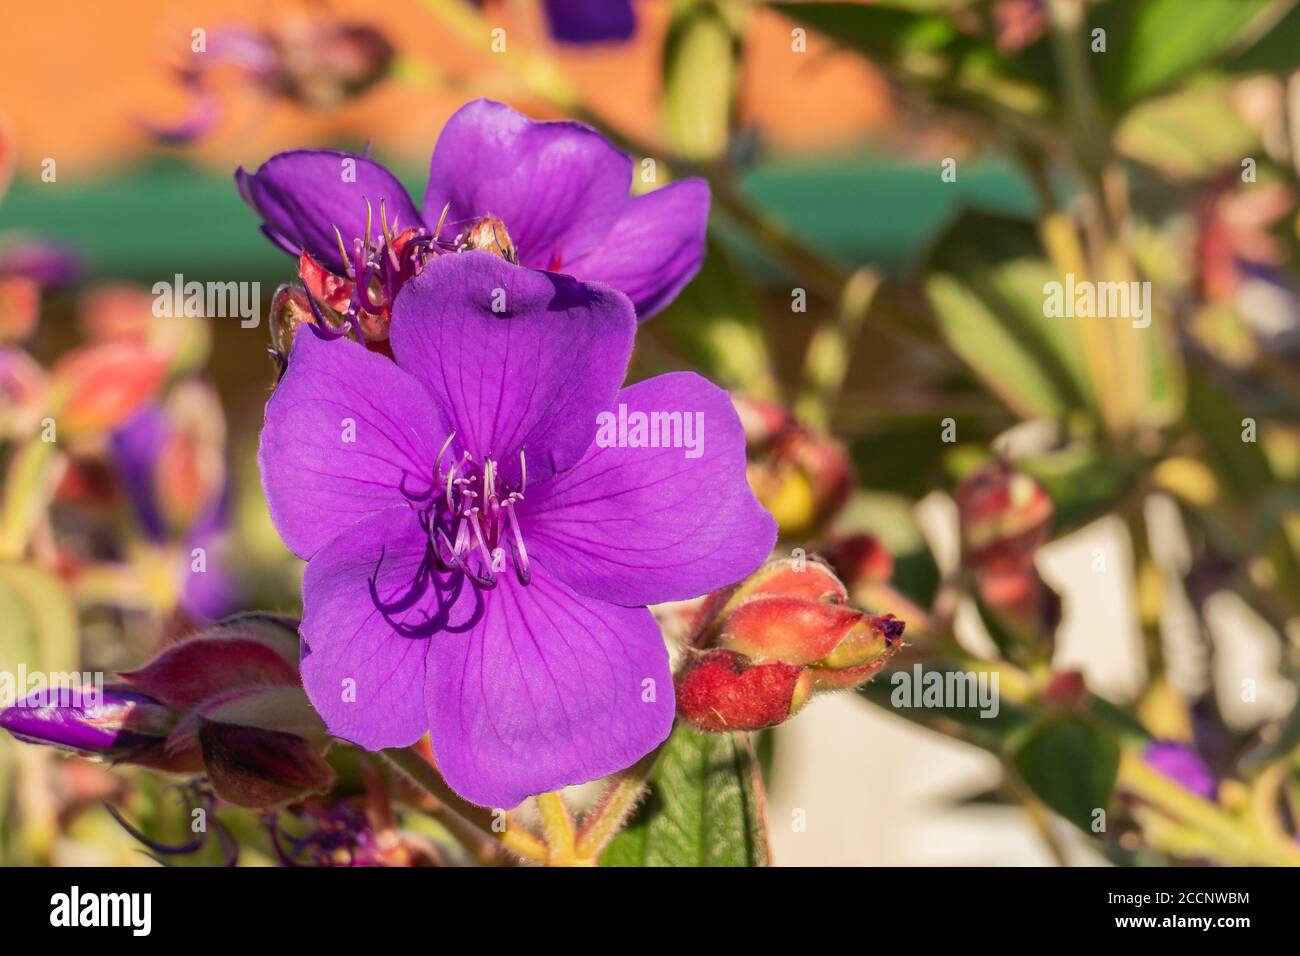 purple flowers from plant glory bush with sunlight Stock Photo